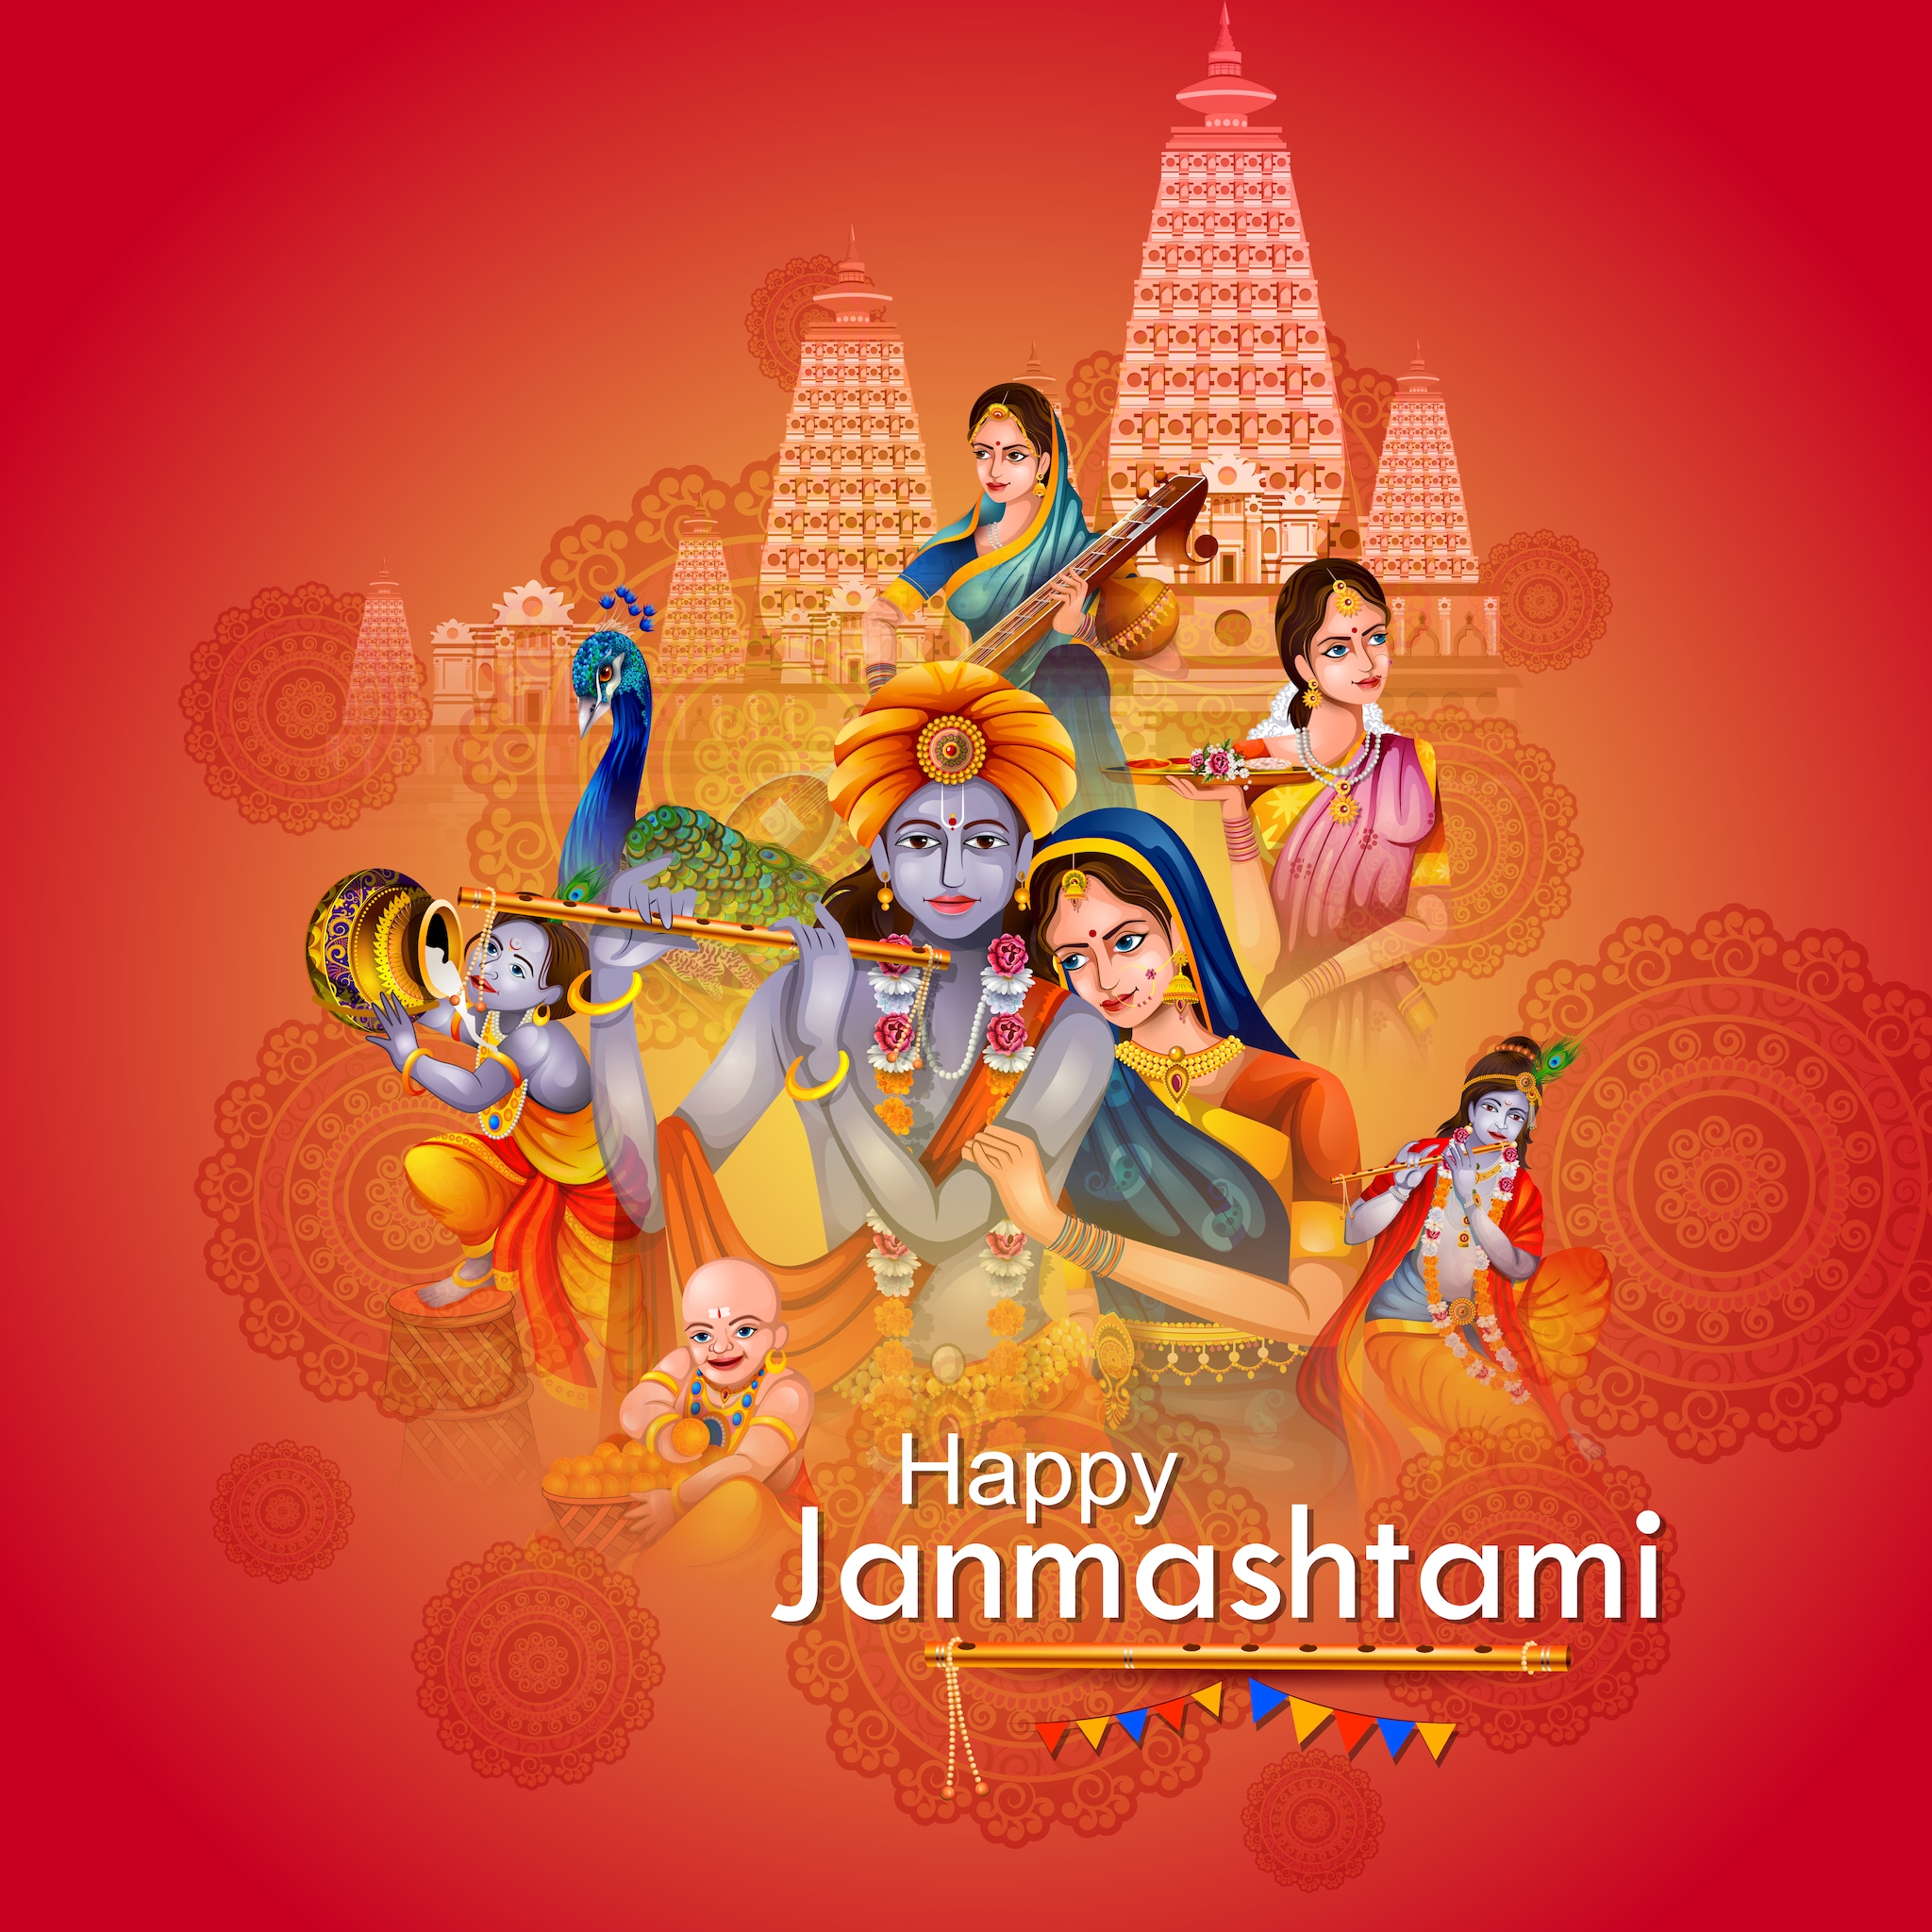 Happy Krishna 2022: Wishes Images, Quotes, Photos, Pics, Facebook SMS and Messages to share with your loved ones on Gokulashtami. (Image: Shutterstock) 